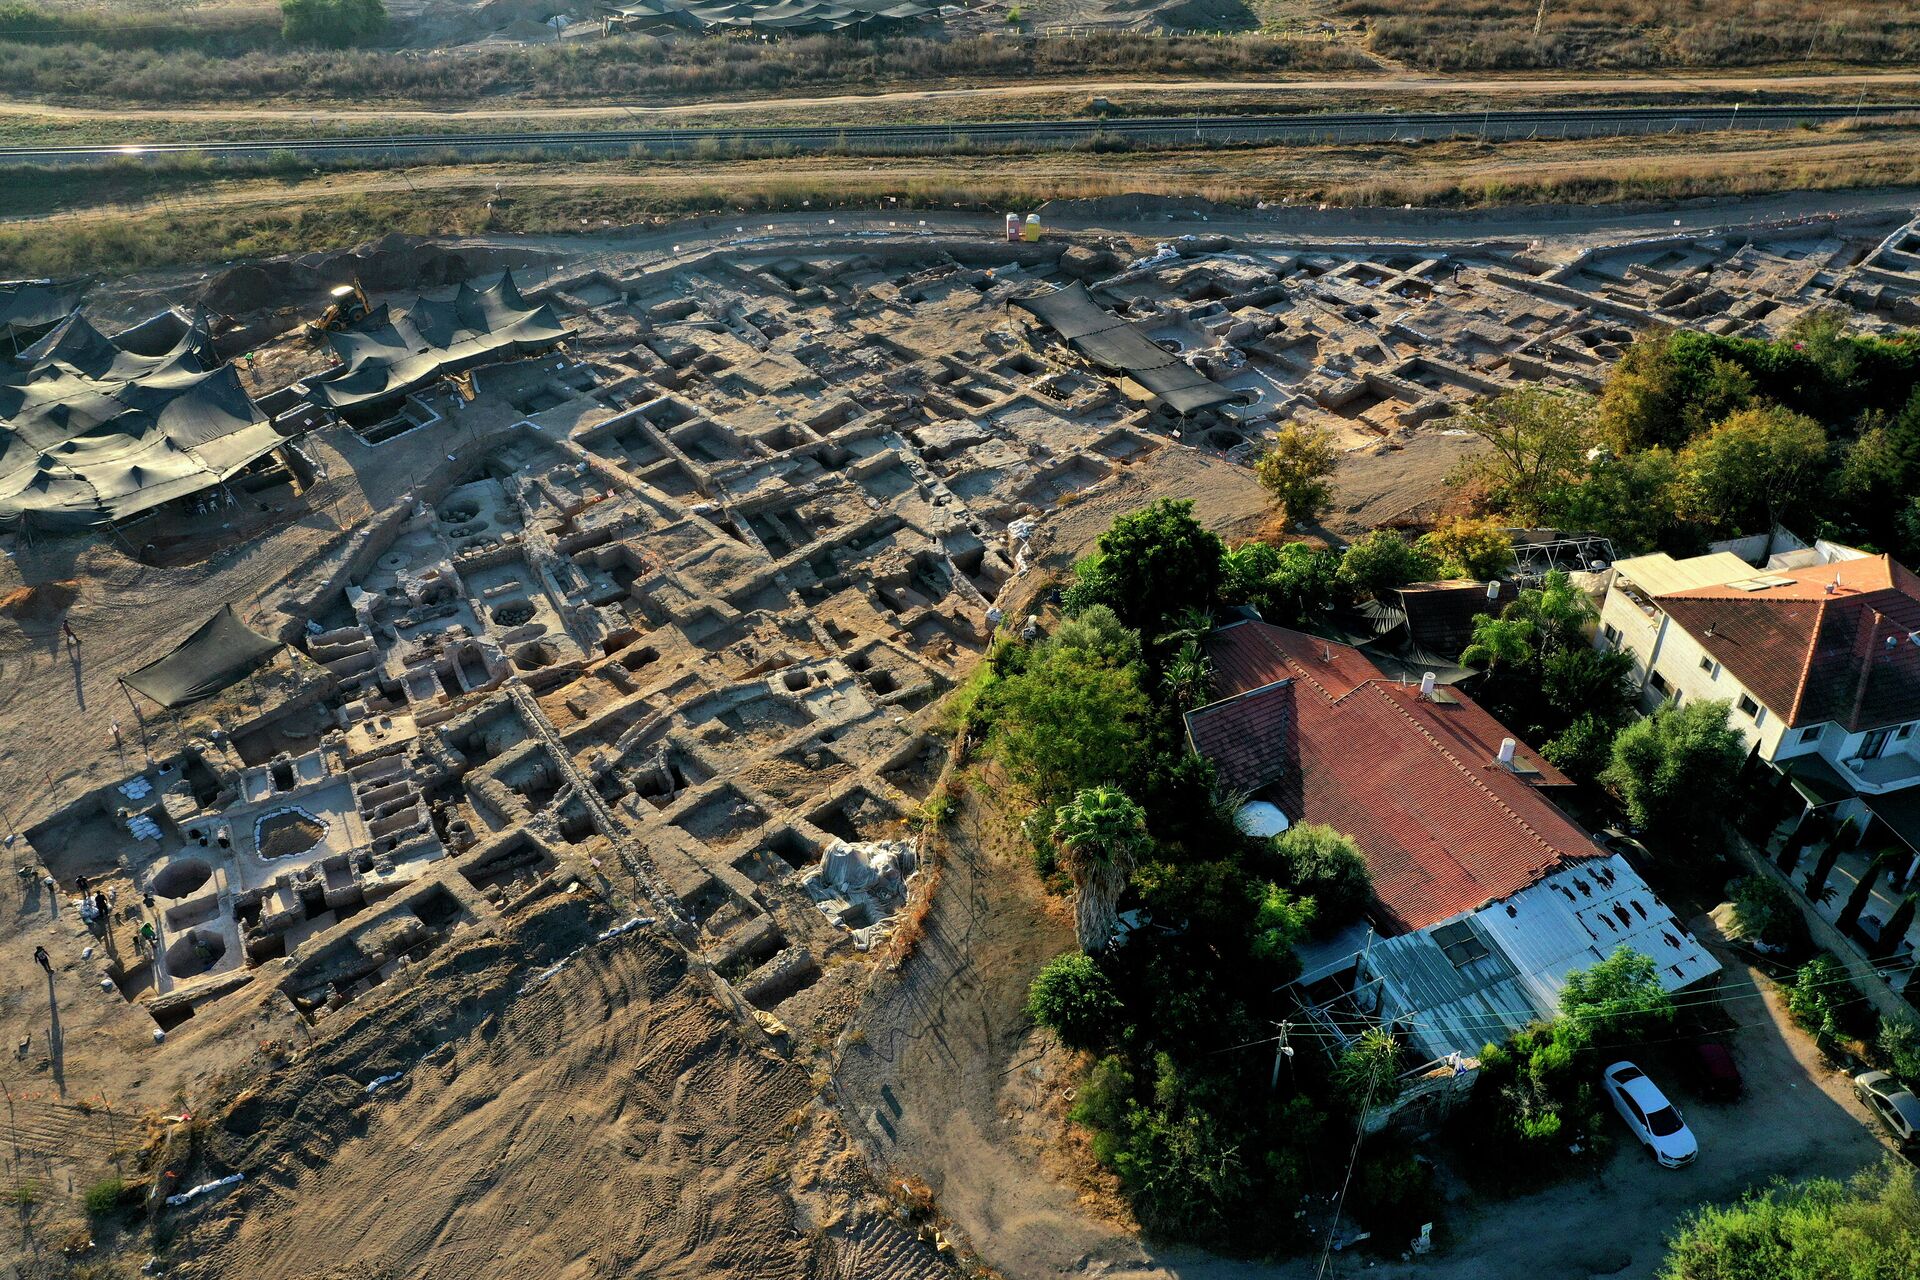 This picture taken on October 11, 2021 in Israel's central city of Yavne shows a general aerial view of the Tel Yavne excavation site, where a massive wine production facility was discovered, the largest such complex of winepresses known from the Byzantine Period. - Sputnik International, 1920, 12.10.2021